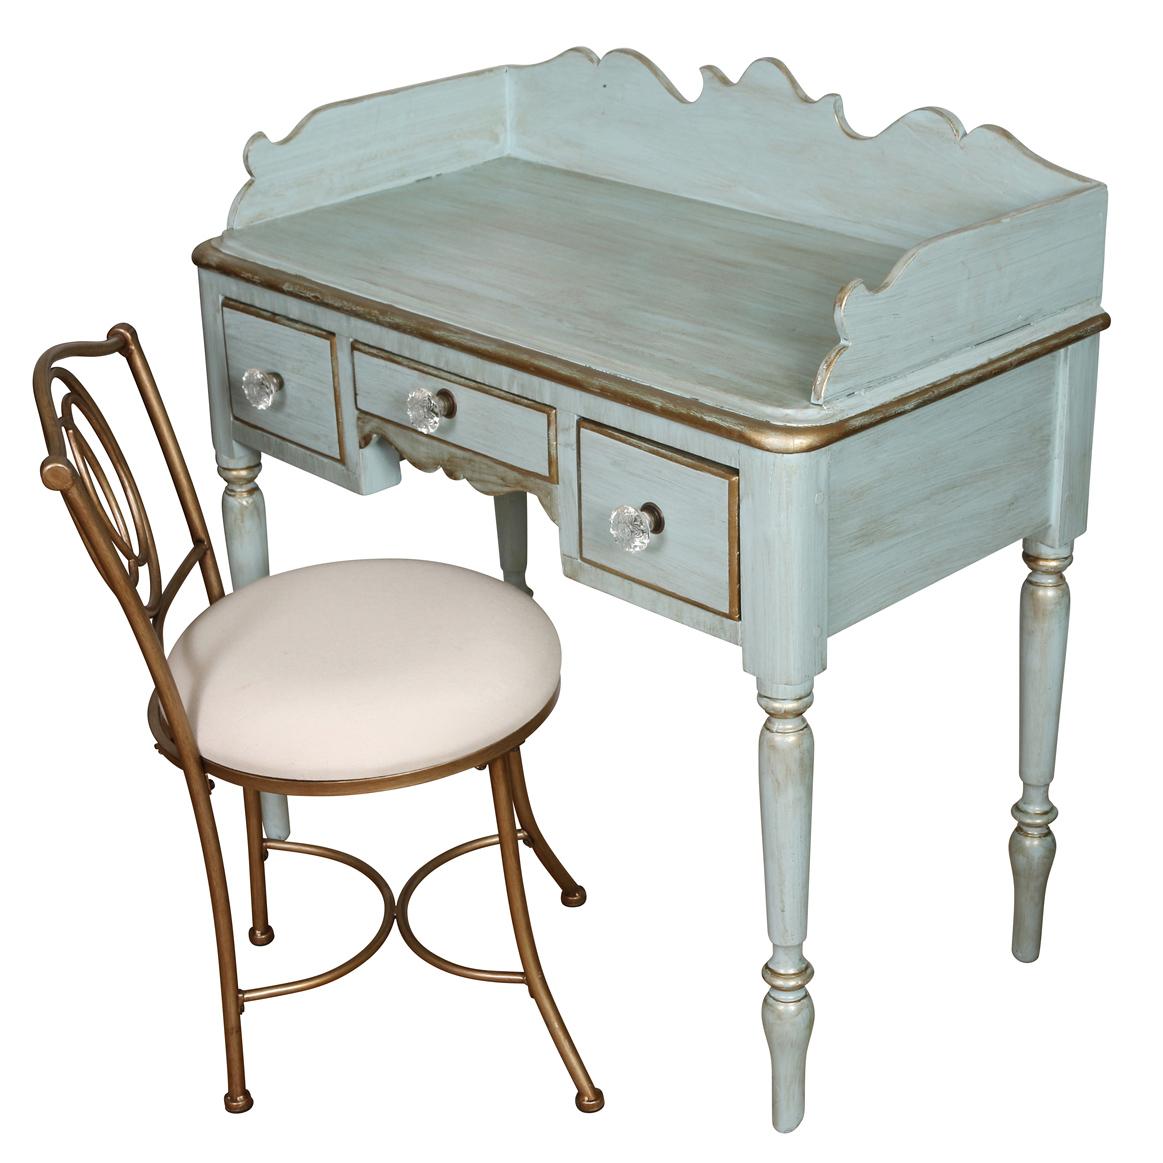 A charming little desk painted in a soft blue with gold accents.  Perfect for a small  office or bedroom, the desk has three drawers with glass knobs and turned legs.  The scalloped back detail adds to its charm.  The desk chair has a gold metal